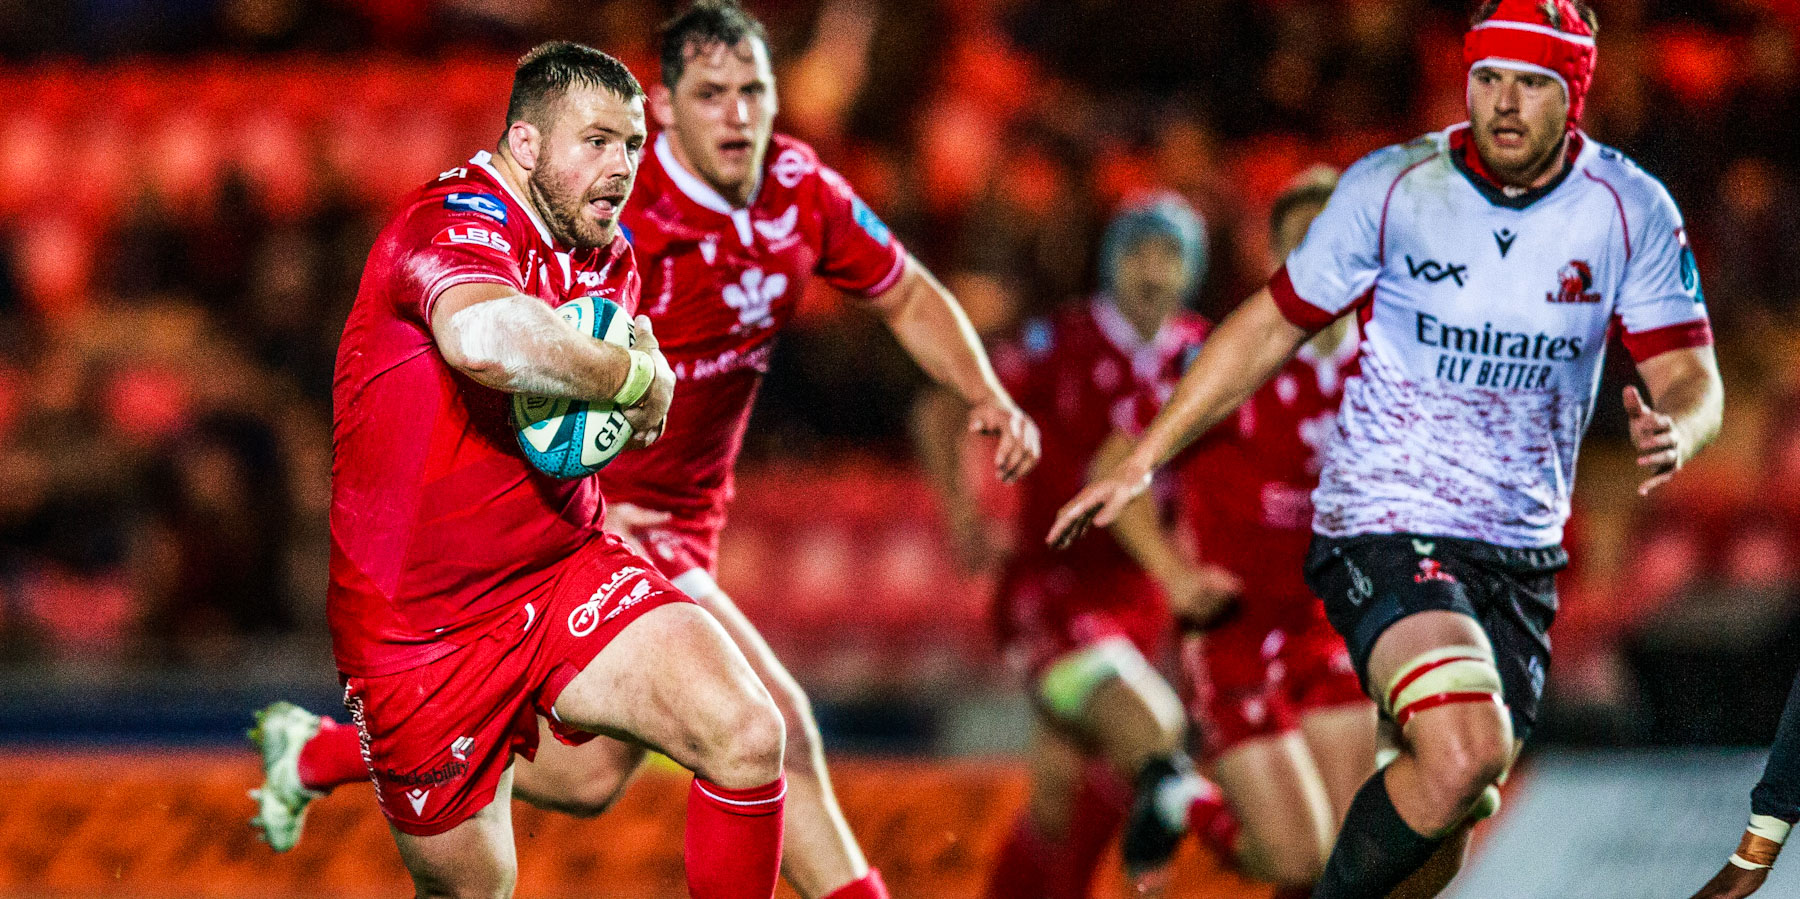 Scarlets will get the weekend underway when they face the Cell C Sharks in Durban.